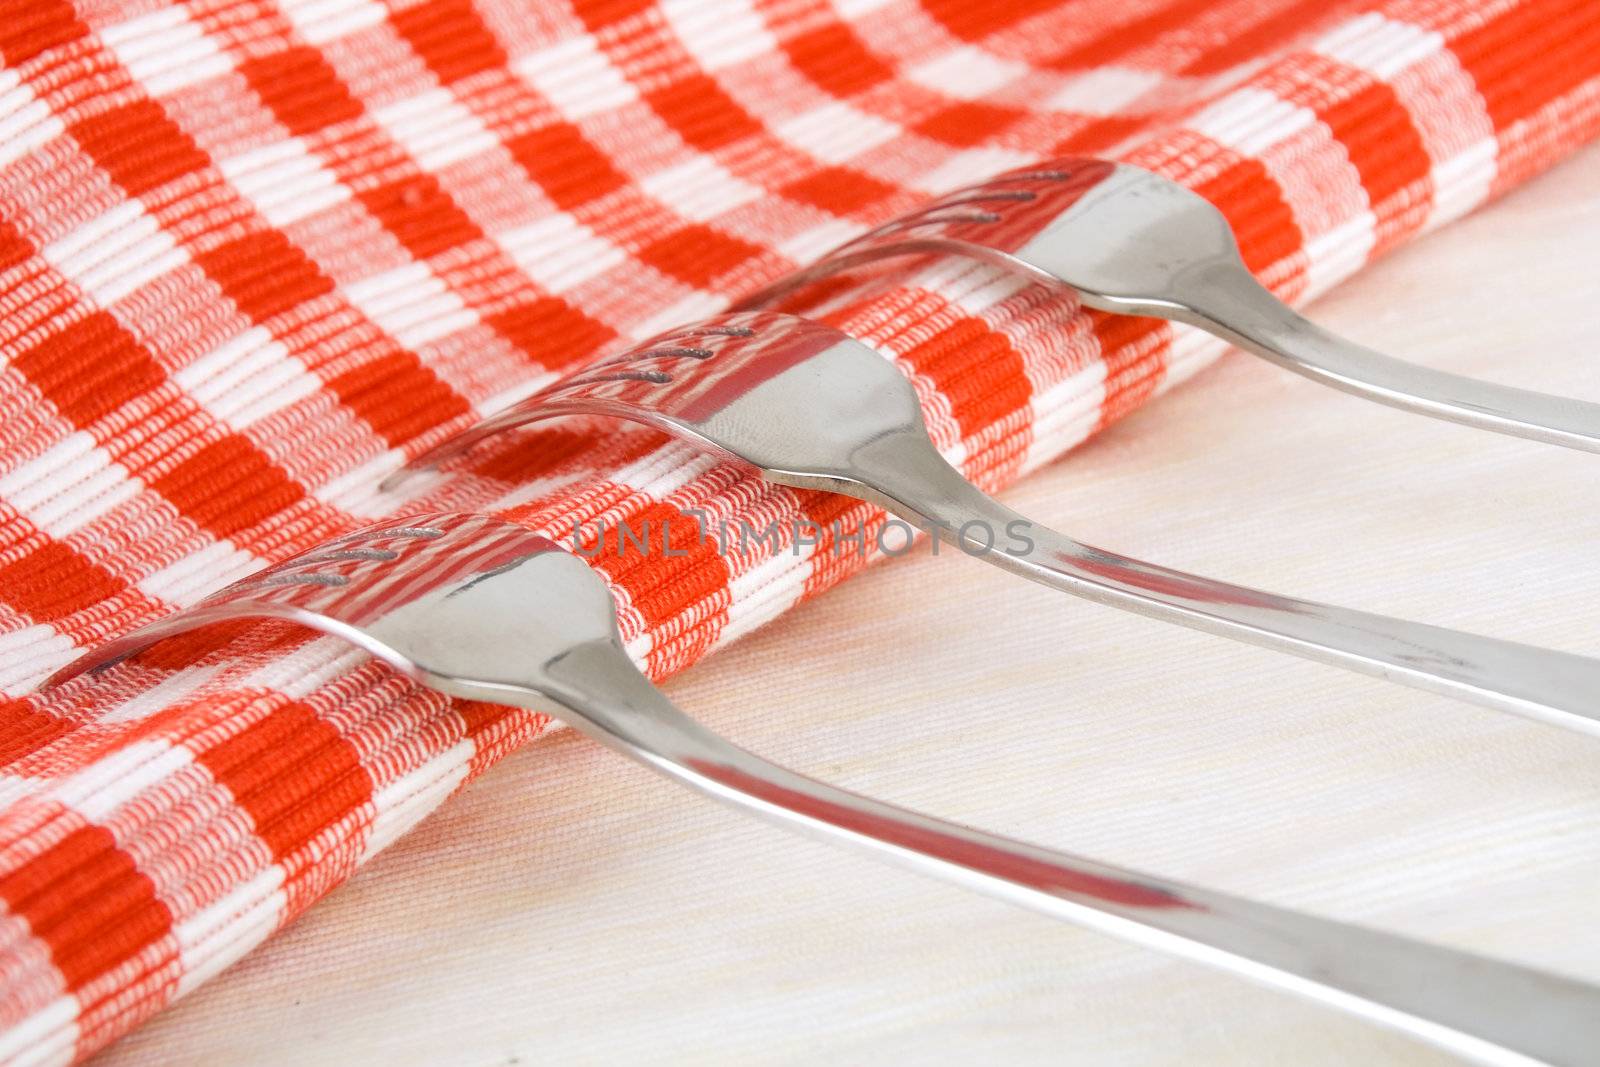 Shiny stainless steel forks on checkered fabric